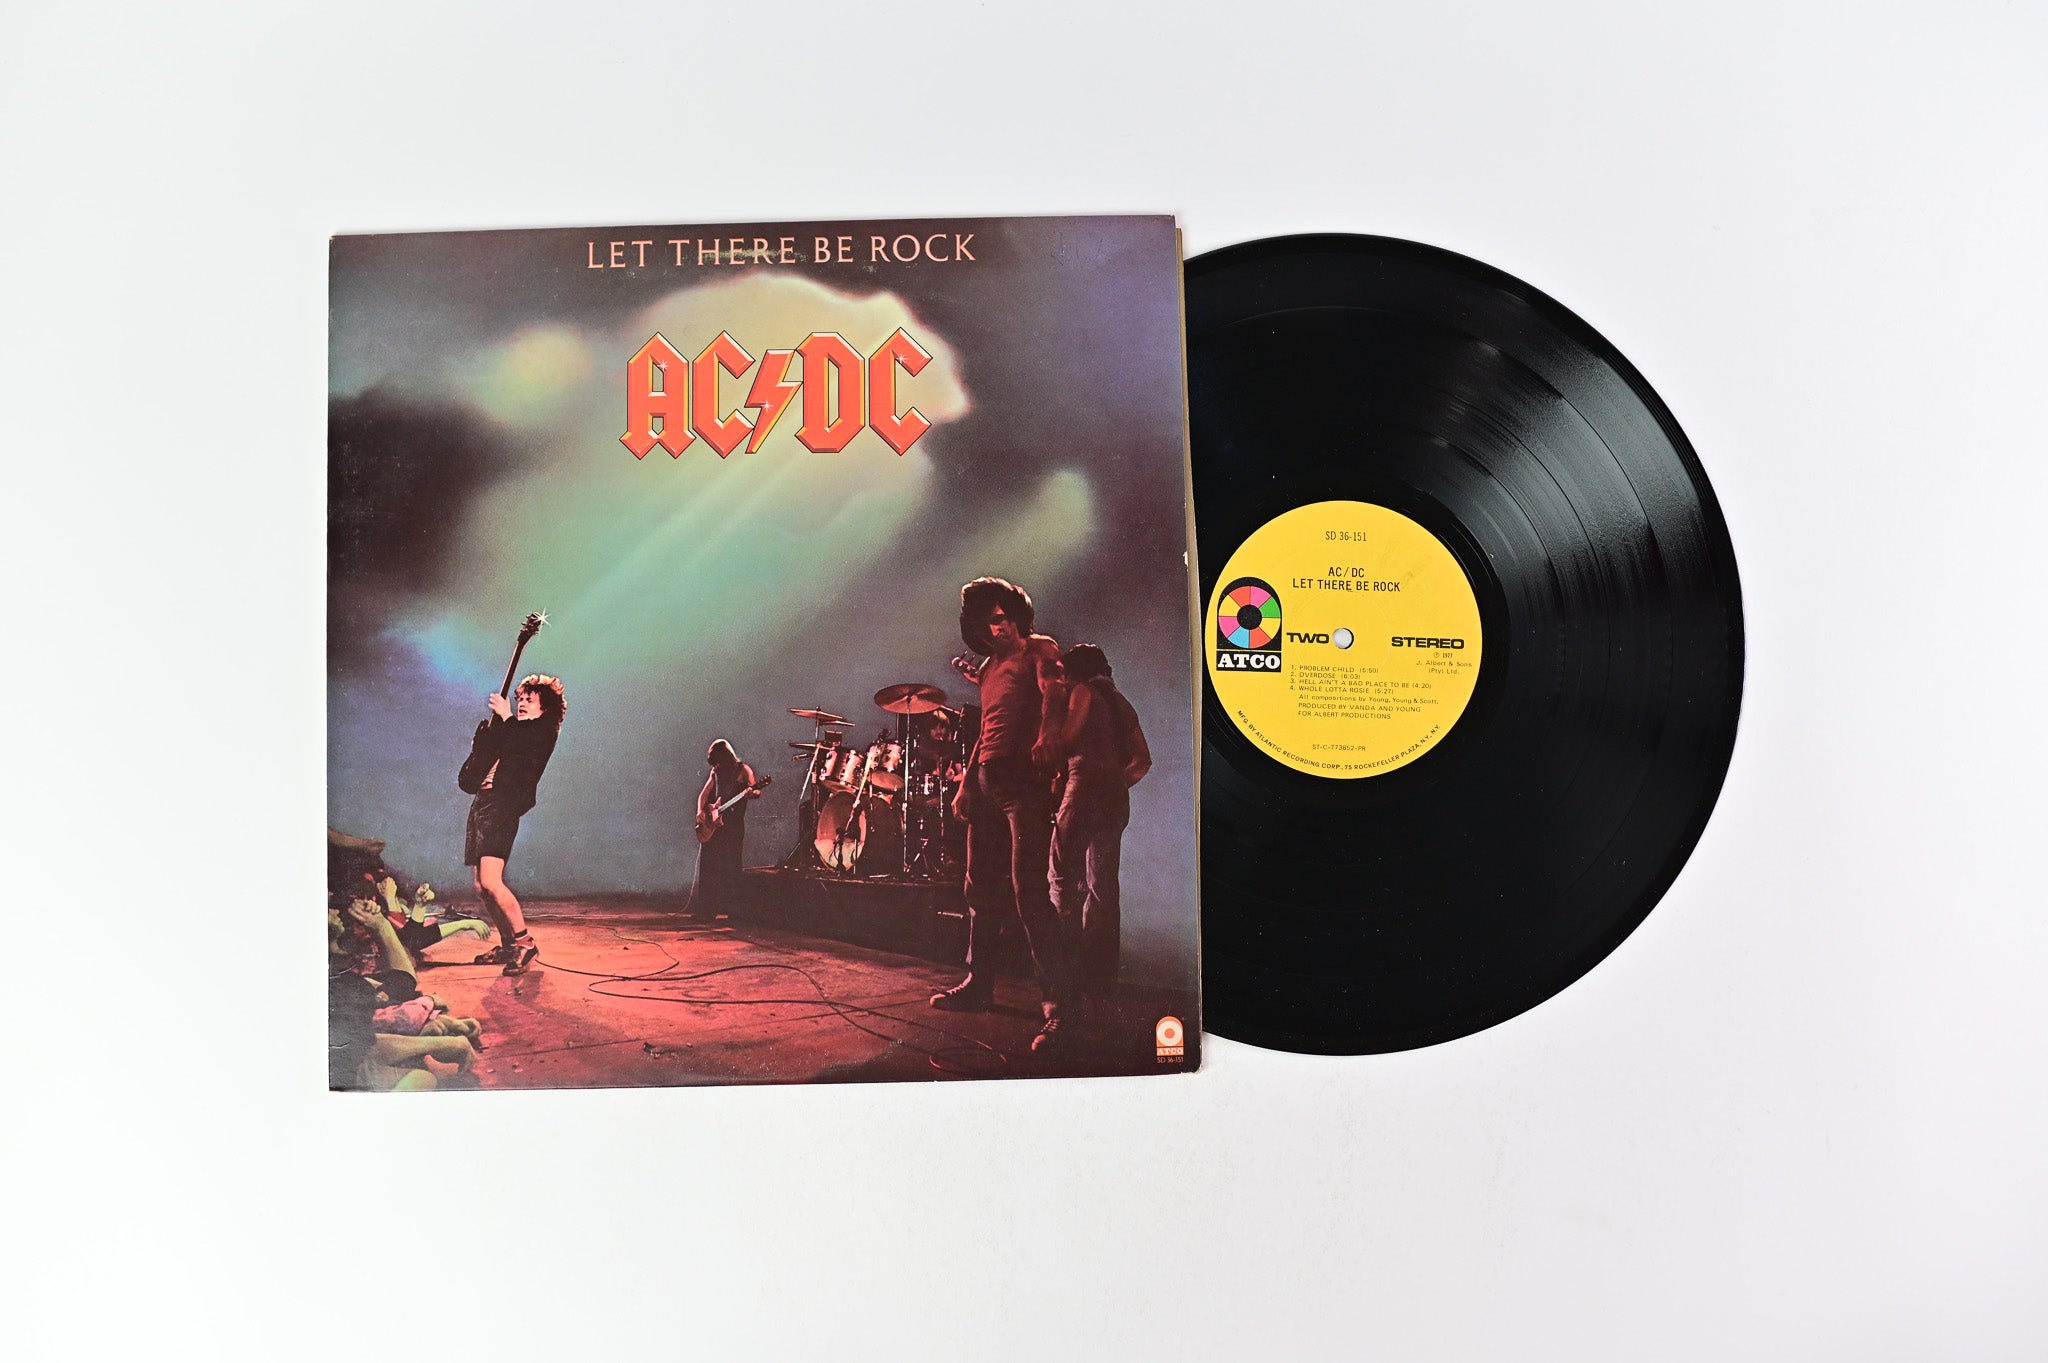 AC/DC - Let There Be Rock on Atco